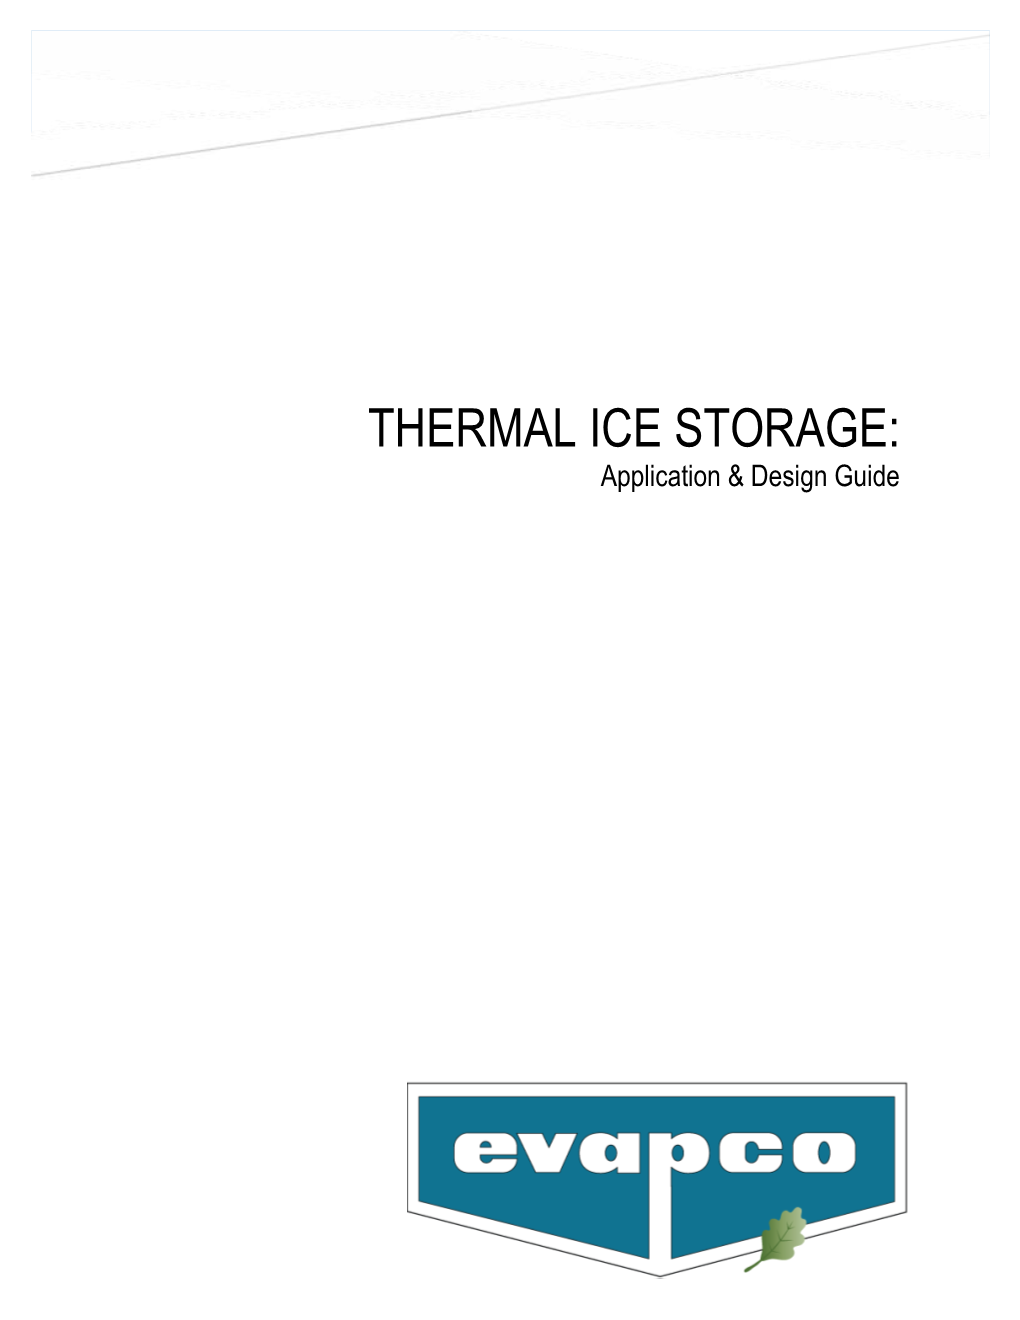 Thermal Ice Storage Application & Design Guide